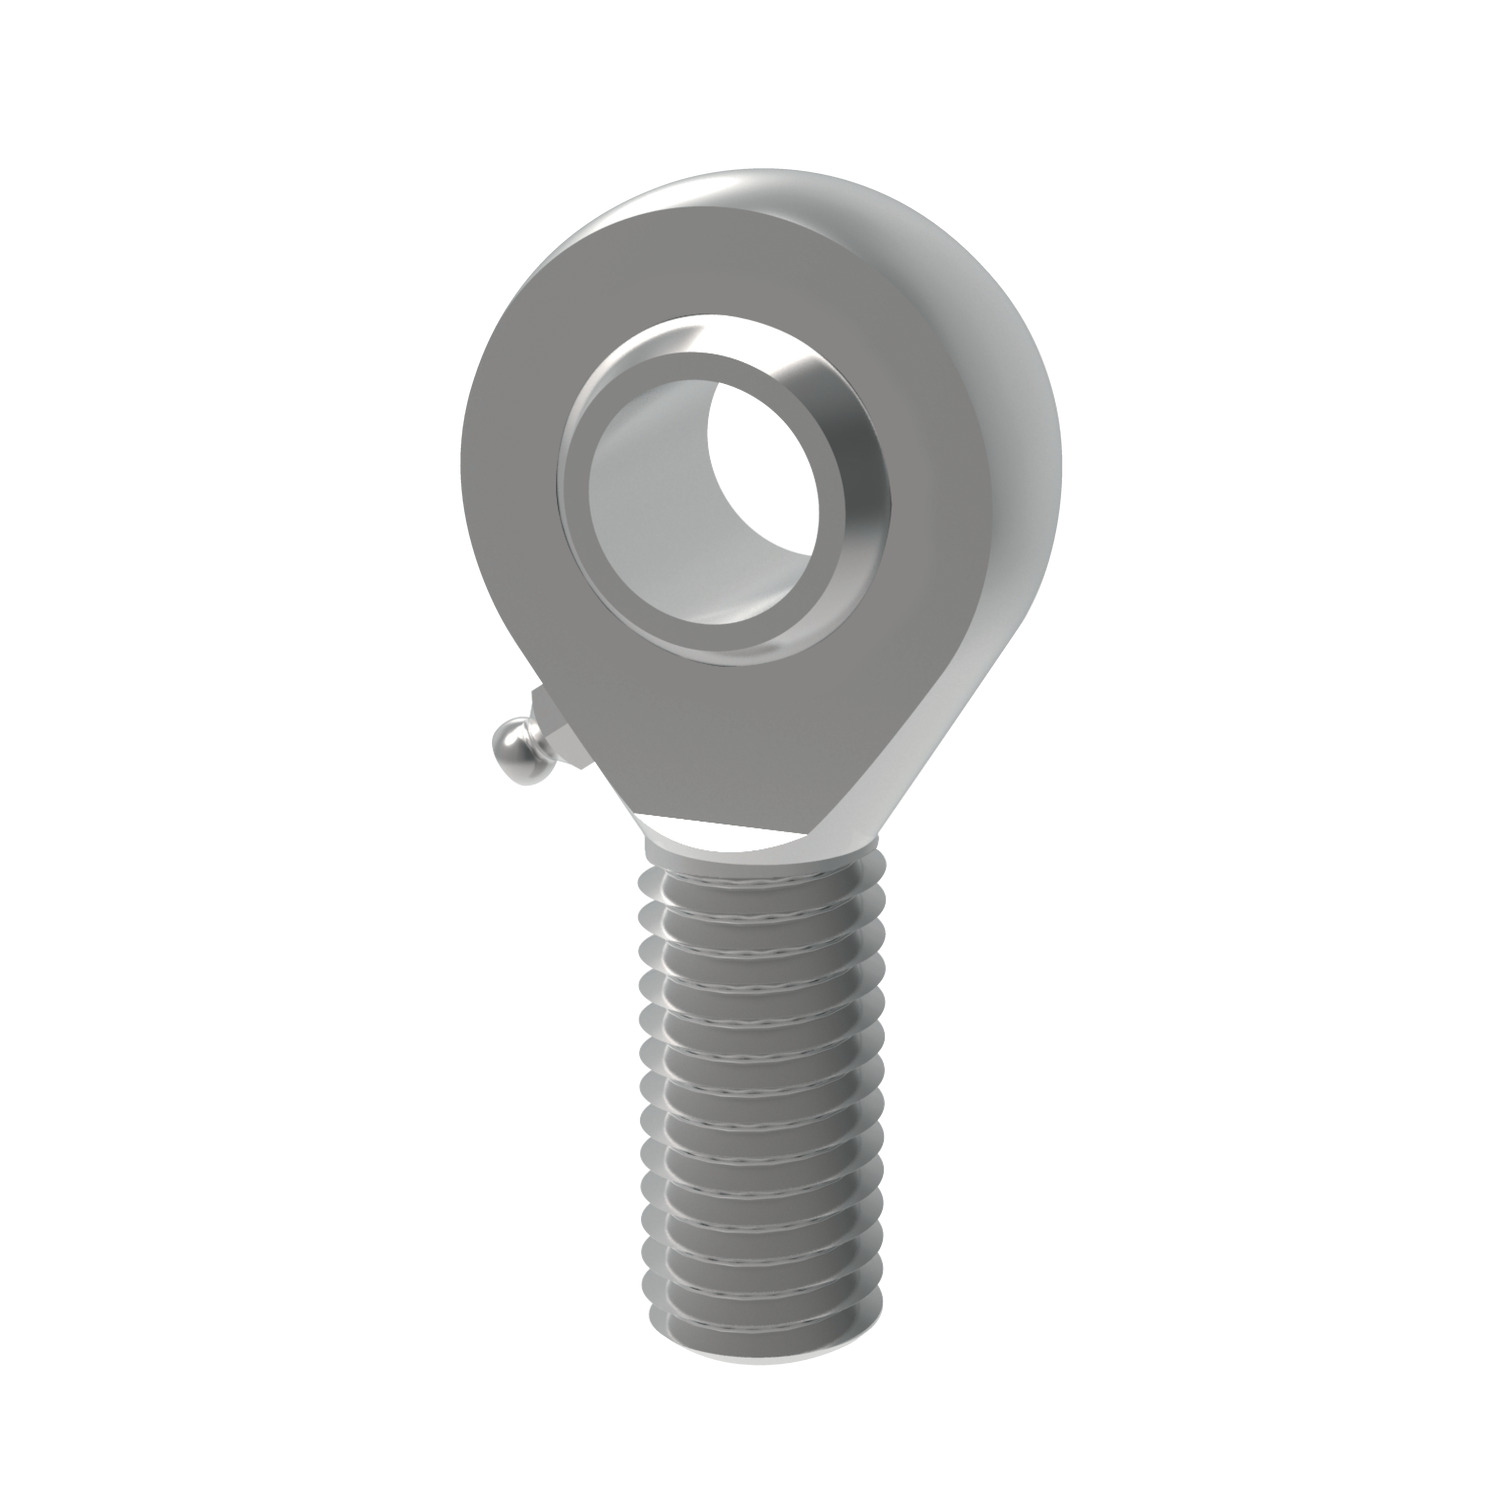 Product R3563, Stainless Heavy-Duty Rod Ends - Male with integral ball bearing / 